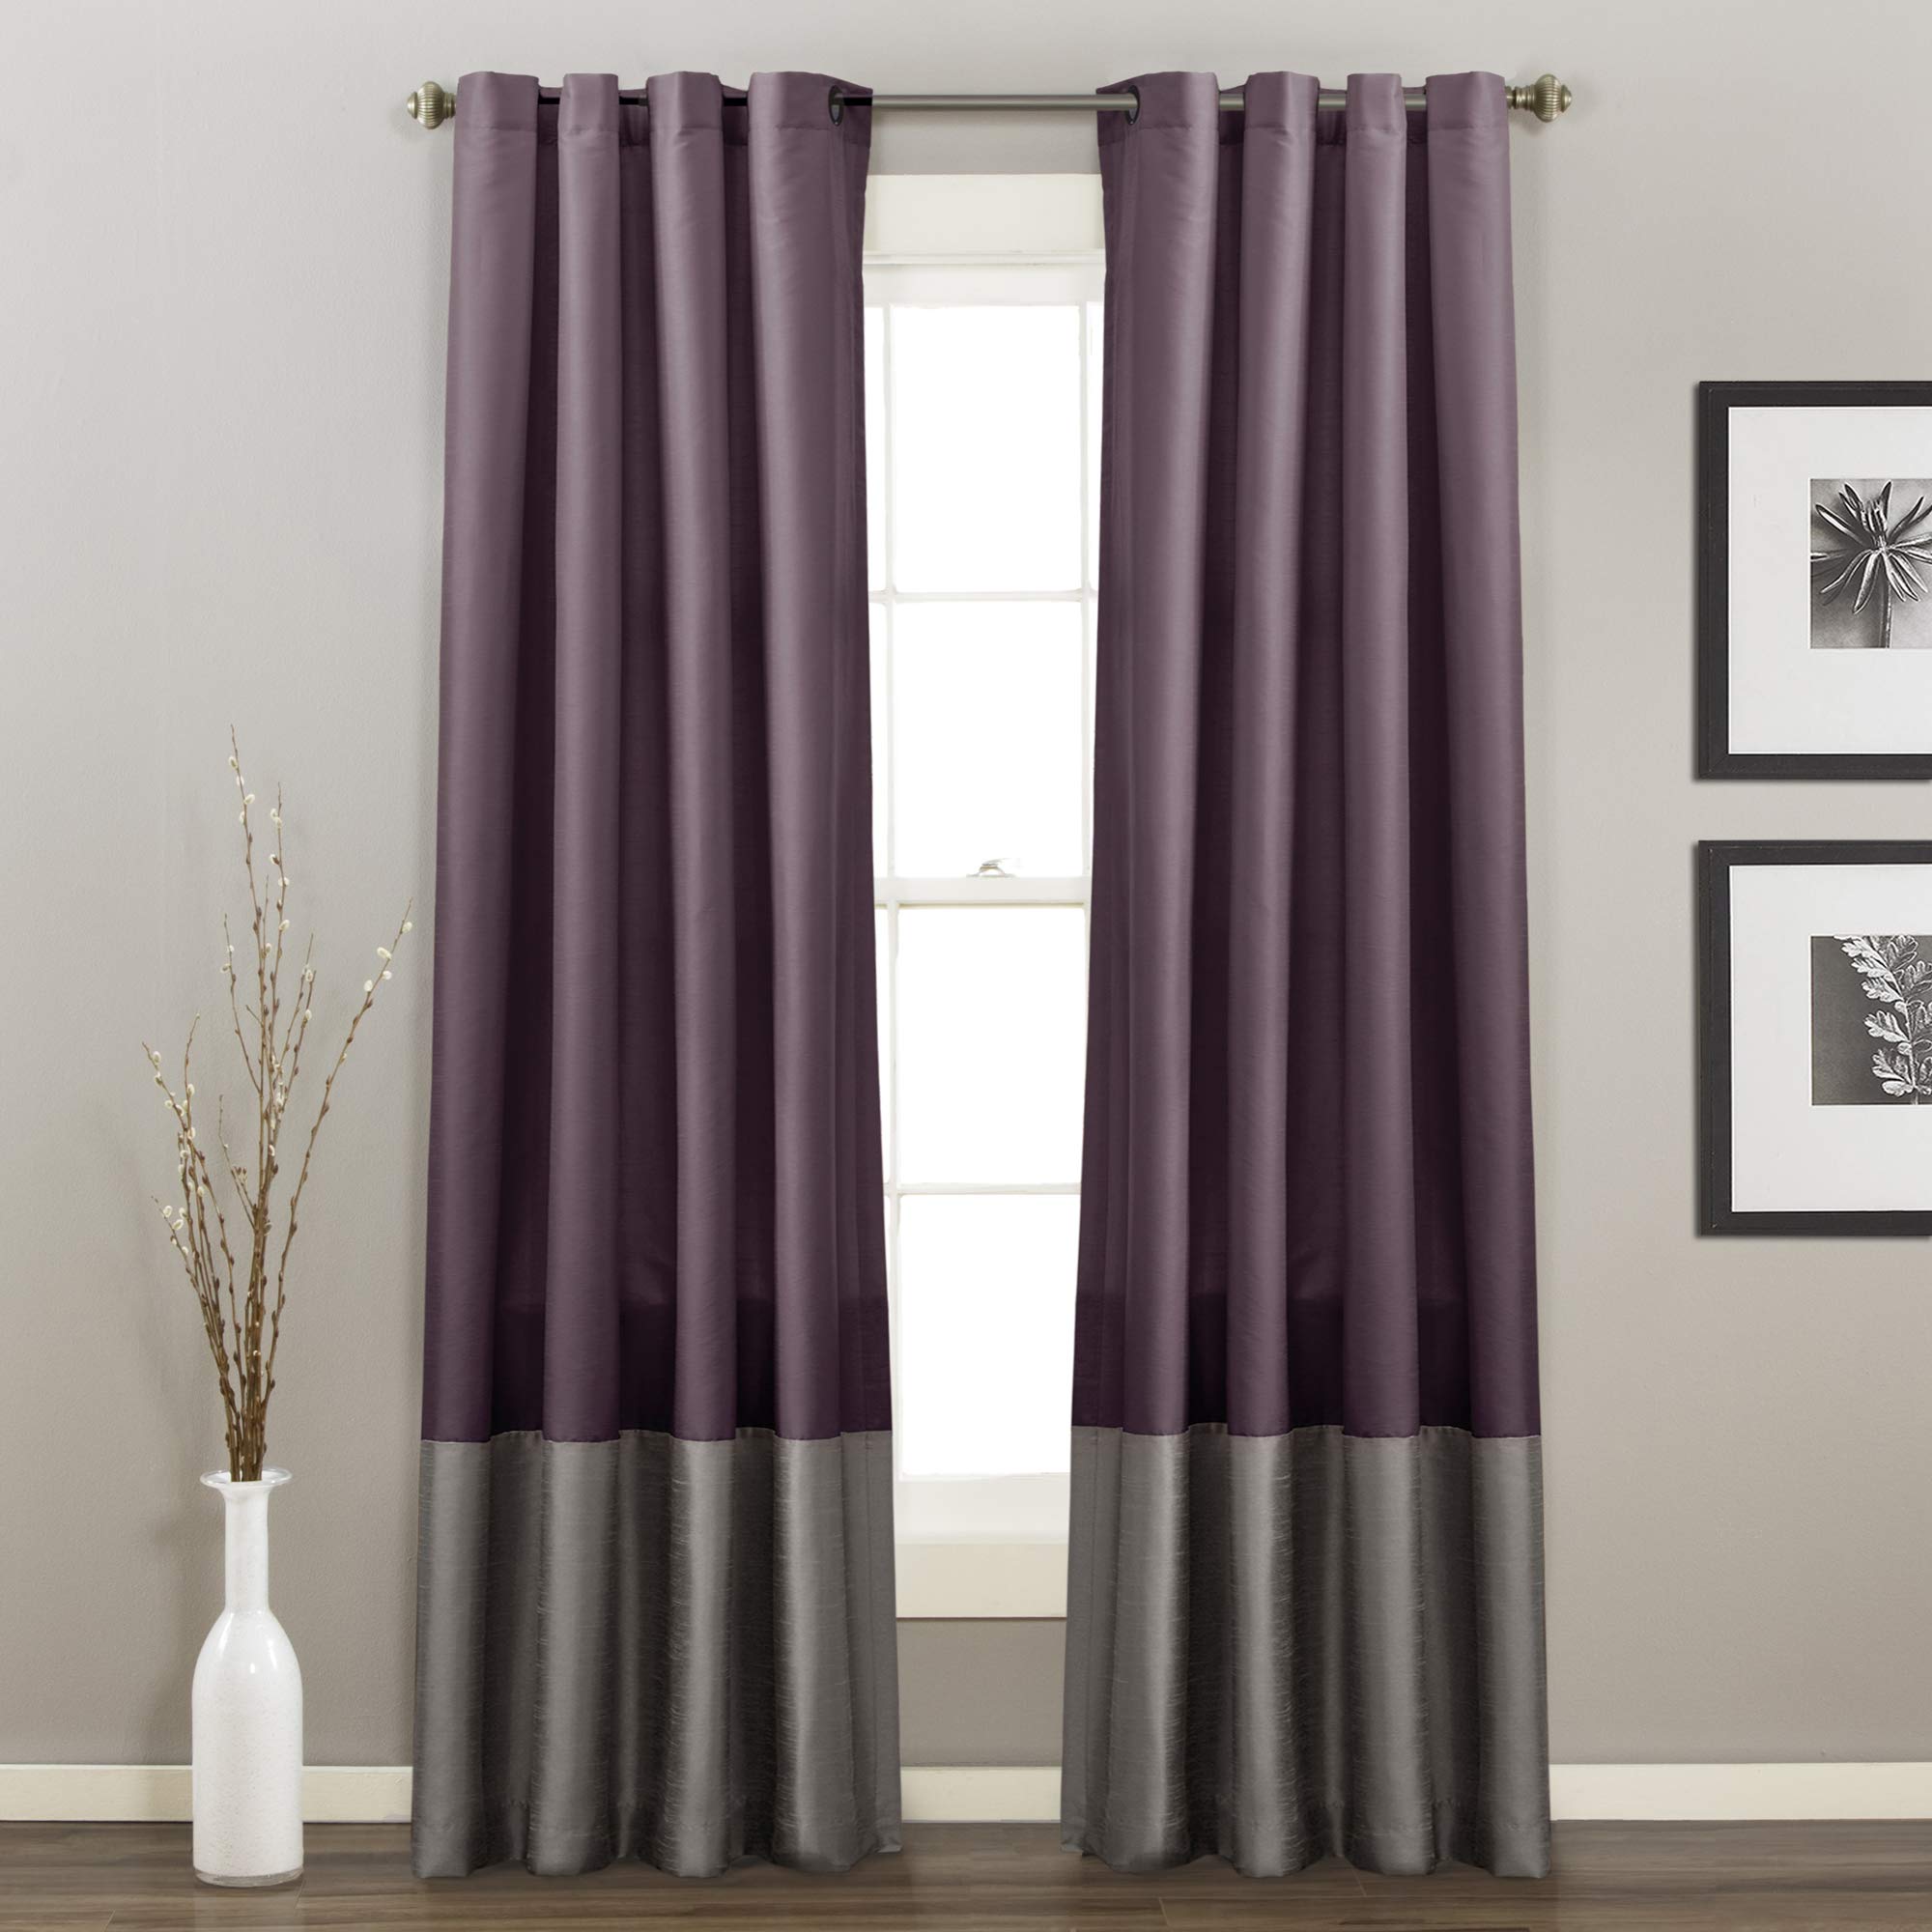 Book Cover Lush Decor White Prima Window Curtains Set for Living, Dining Room, Bedroom, 54 x 84-inch, Panel Pair 84 in x 54 in, Gray/Purple Panel Pair 84 in x 54 in Gray/Purple